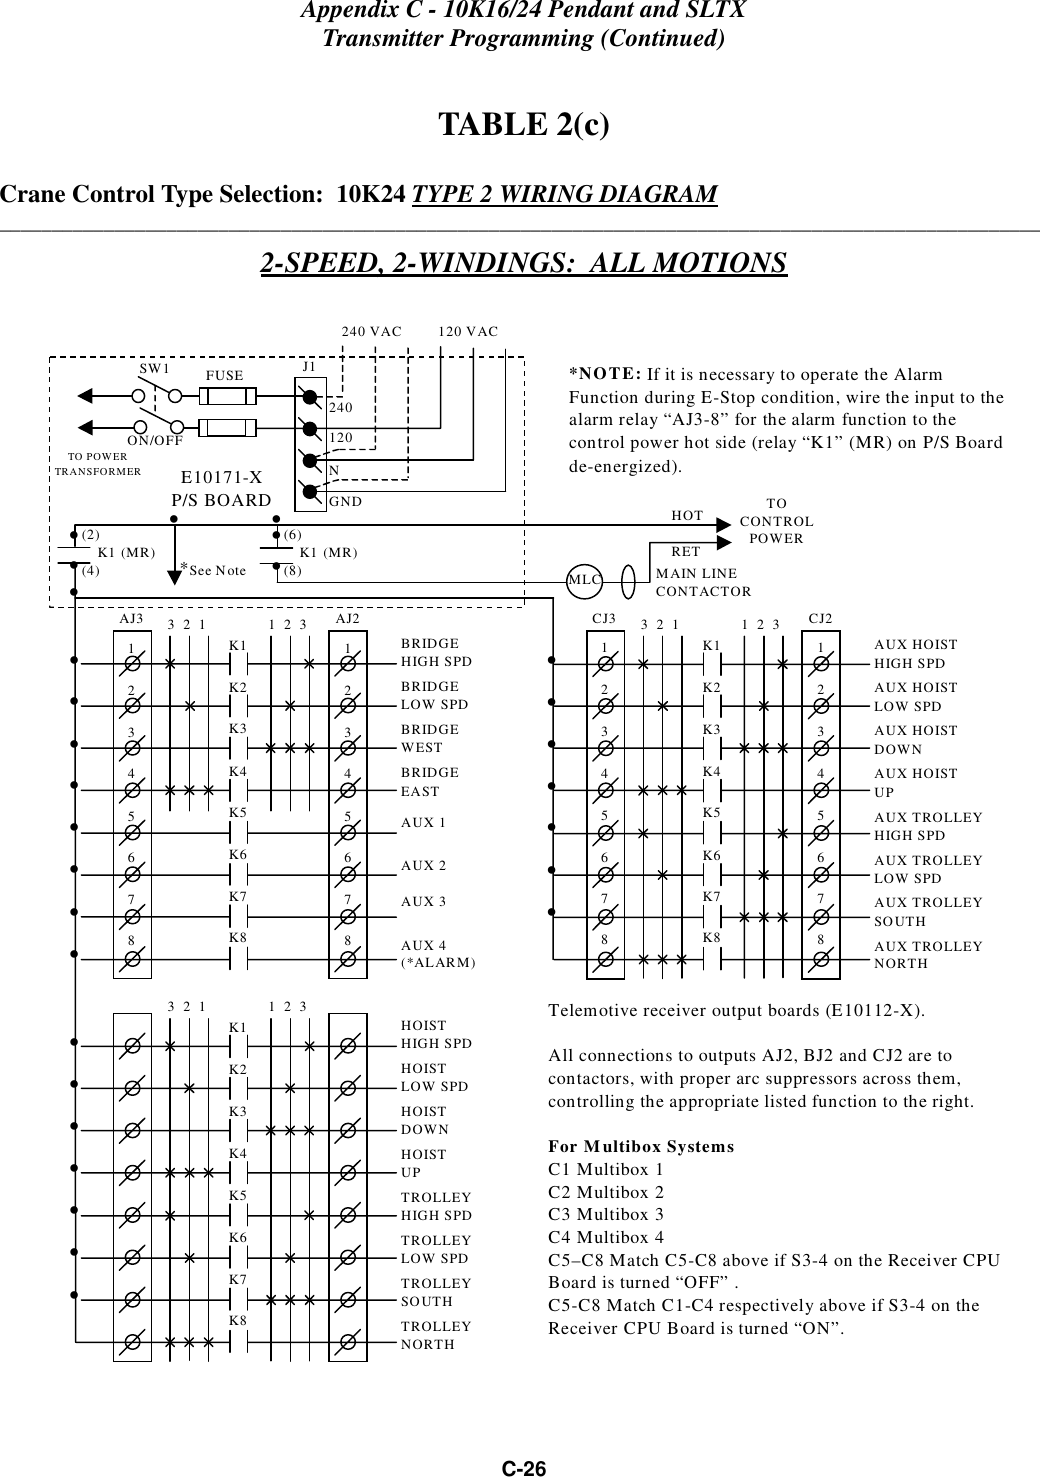 Appendix C - 10K16/24 Pendant and SLTXTransmitter Programming (Continued)C-26TABLE 2(c)Crane Control Type Selection:  10K24 TYPE 2 WIRING DIAGRAM____________________________________________________________________________________________________2-SPEED, 2-WINDINGS:  ALL MOTIONSCJ312345678CJ212345678K1K2K3K4K5K6K7K83  2  1 1  2  3AUX HOISTHIGH SPDAUX HOISTLOW SPDAUX HOISTDOWNAUX HOISTUPAUX TROLLEYHIGH SPDAUX TROLLEYLOW SPDAUX TROLLEYSOUTHAUX TROLLEYNORTH• • • • • • • K1K2K3K4K5K6K7K83  2  1 1  2  3HOISTHIGH SPDHOISTLOW SPDHOISTDOWNHOISTUPTROLLEYHIGH SPDTROLLEYLOW SPDTROLLEYSOUTHTROLLEYNORTH• • • • • • AJ312345678AJ212345678K1K2K3K4K5K6K7K83  2  1 1  2  3BRIDGEHIGH SPDBRIDGELOW SPDBRIDGEWESTBRIDGEEASTAUX 1AUX 2AUX 3AUX 4(*ALARM)• • • • • • • • *NOTE: If it is necessary to operate the AlarmFunction during E-Stop condition, wire the input to thealarm relay “AJ3-8” for the alarm function to thecontrol power hot side (relay “K1” (MR) on P/S Boardde-energized).240 VAC         120 VACSW1ON/OFFTO POWERTRANSFORMER E10171-XP/S BOARDMAIN LINECONTACTORTOCONTROLPOWERMLCHOTRET(2)    K1   (MR)(4)• • • *See Note• 240120FUSE J1NGND(6)    K1   (MR)(8)• • • • Telemotive receiver output boards (E10112-X).All connections to outputs AJ2, BJ2 and CJ2 are tocontactors, with proper arc suppressors across them,controlling the appropriate listed function to the right.For Multibox SystemsC1 Multibox 1C2 Multibox 2C3 Multibox 3C4 Multibox 4C5–C8 Match C5-C8 above if S3-4 on the Receiver CPUBoard is turned “OFF” .C5-C8 Match C1-C4 respectively above if S3-4 on theReceiver CPU Board is turned “ON”.